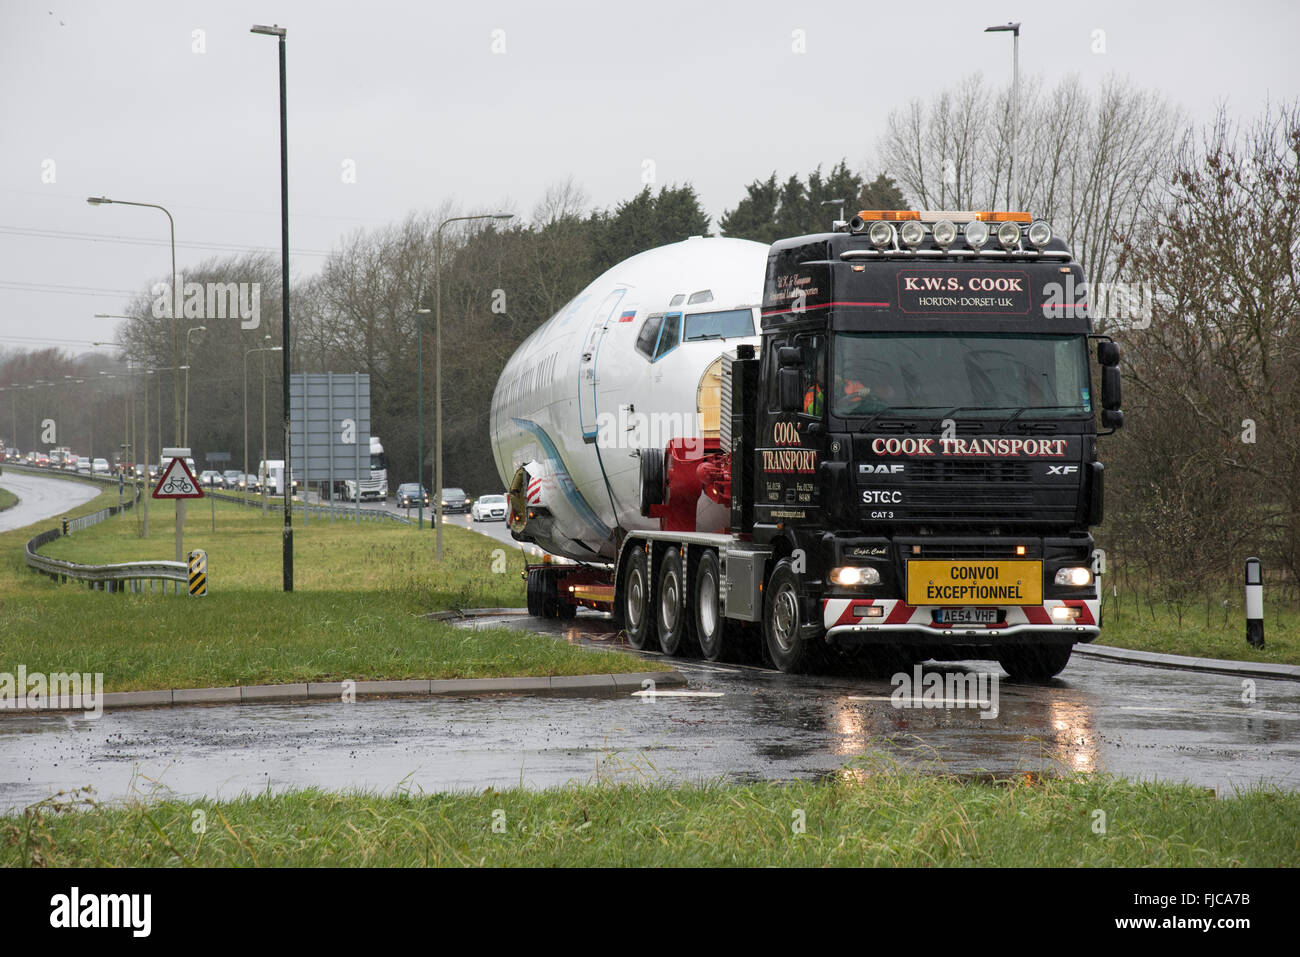 An abnormal load consisting of a Boeing 737 airliner fuselage travels along the A419 at Cirencester causing a traffic jam Stock Photo